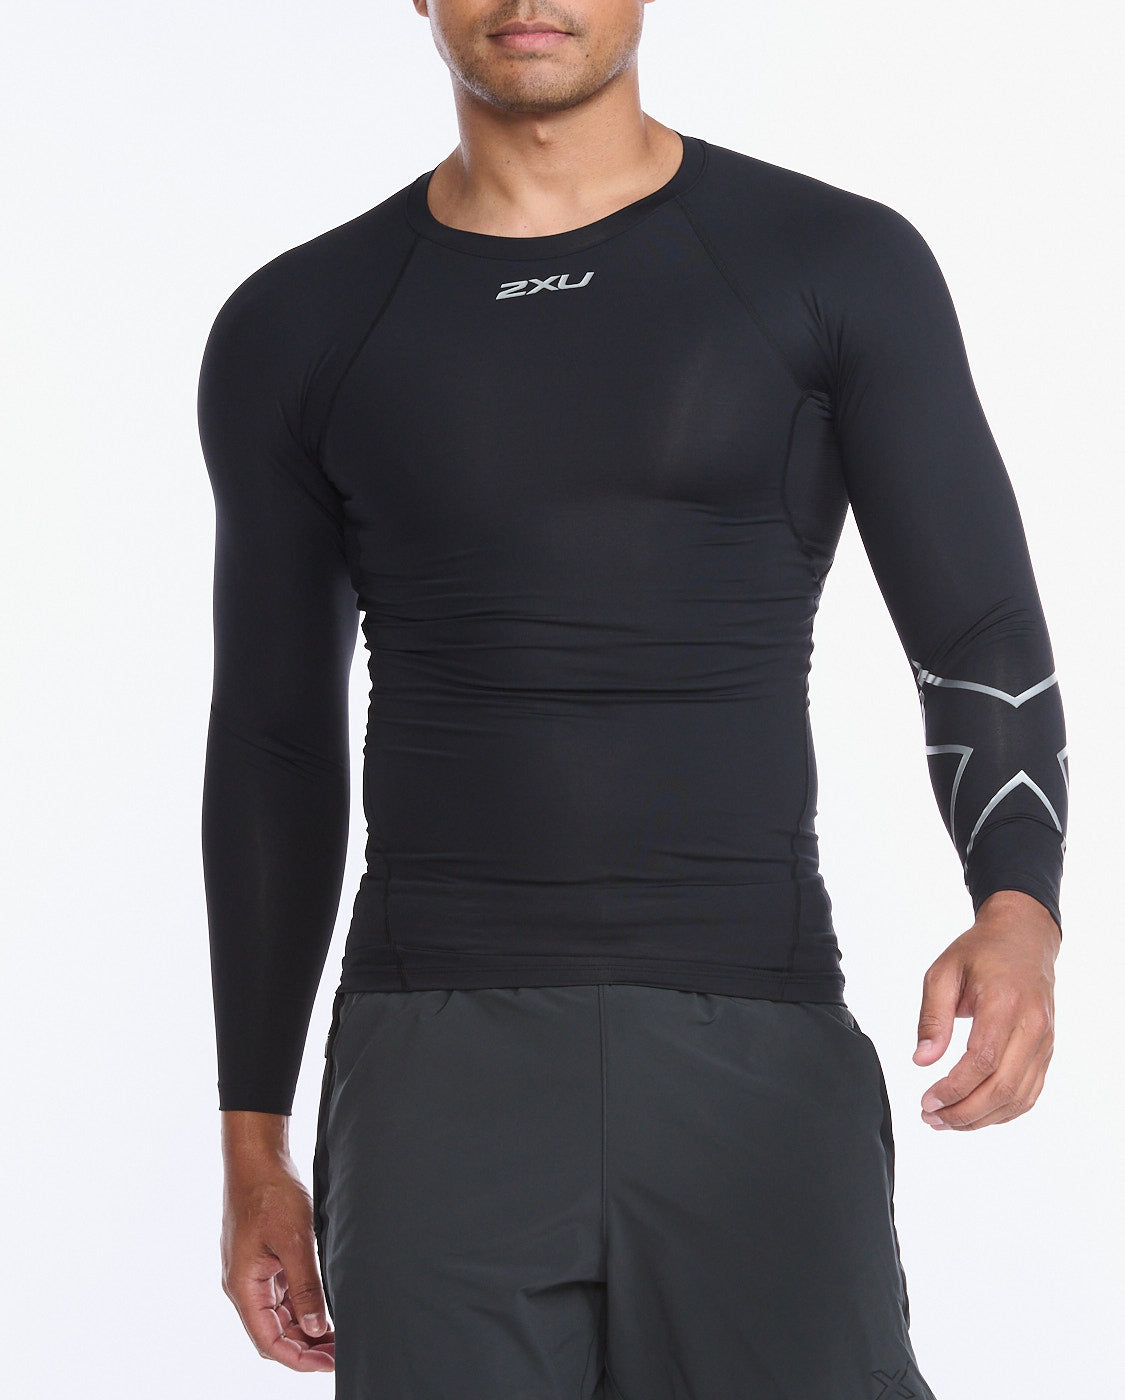 Used 2XU Refresh Recovery Compression Long-Sleeve Top